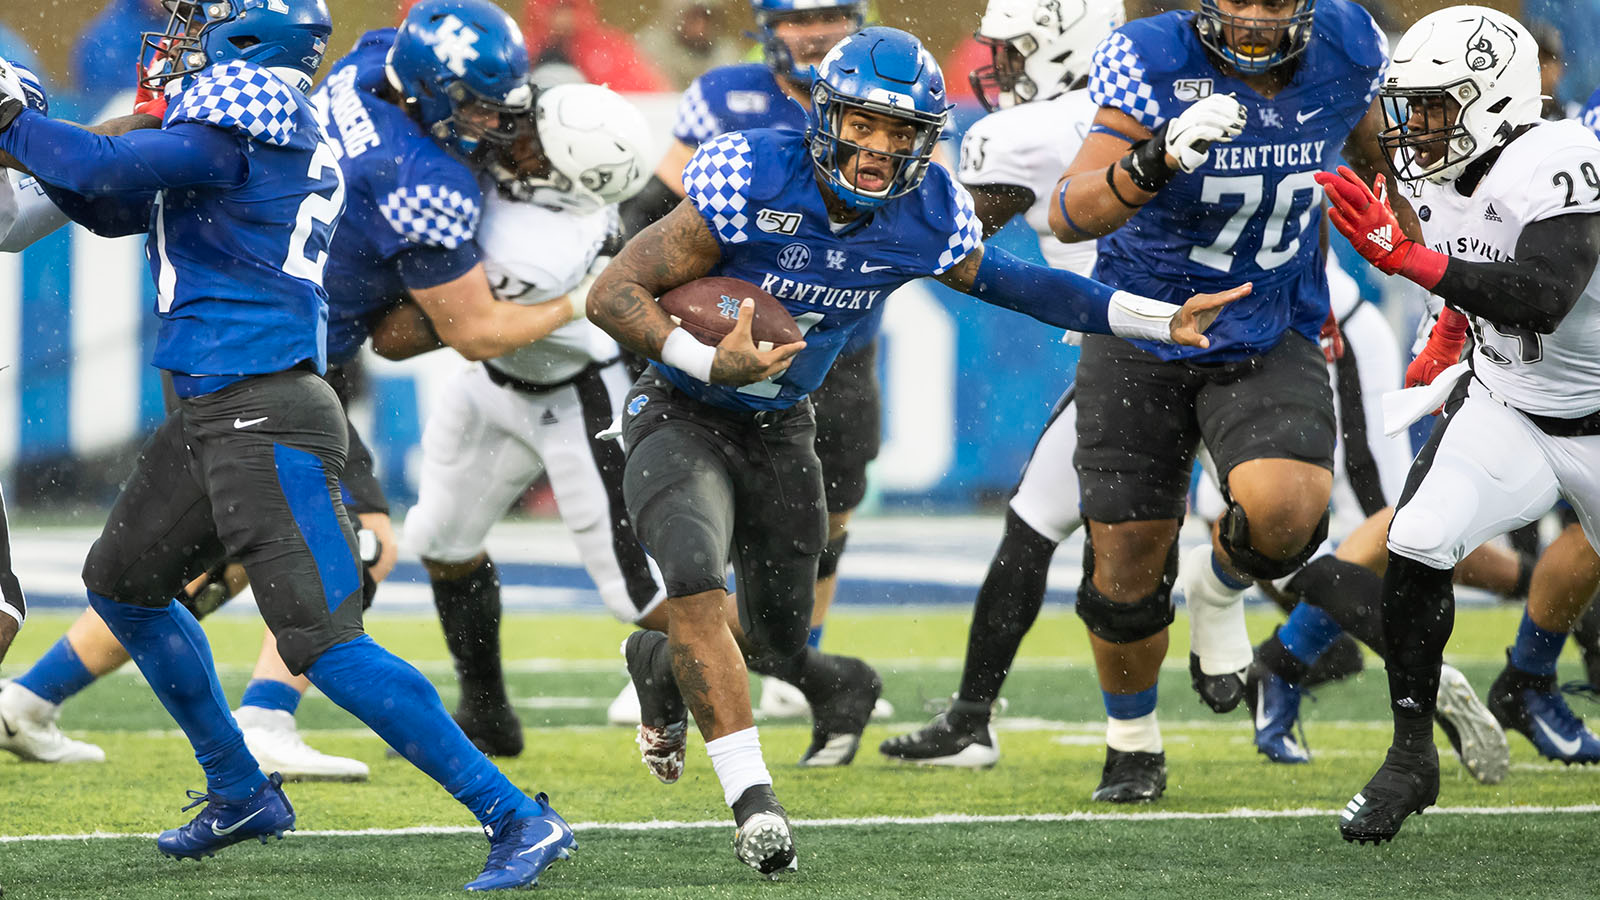 Bowden's Career Day Carries Cats Past Cards